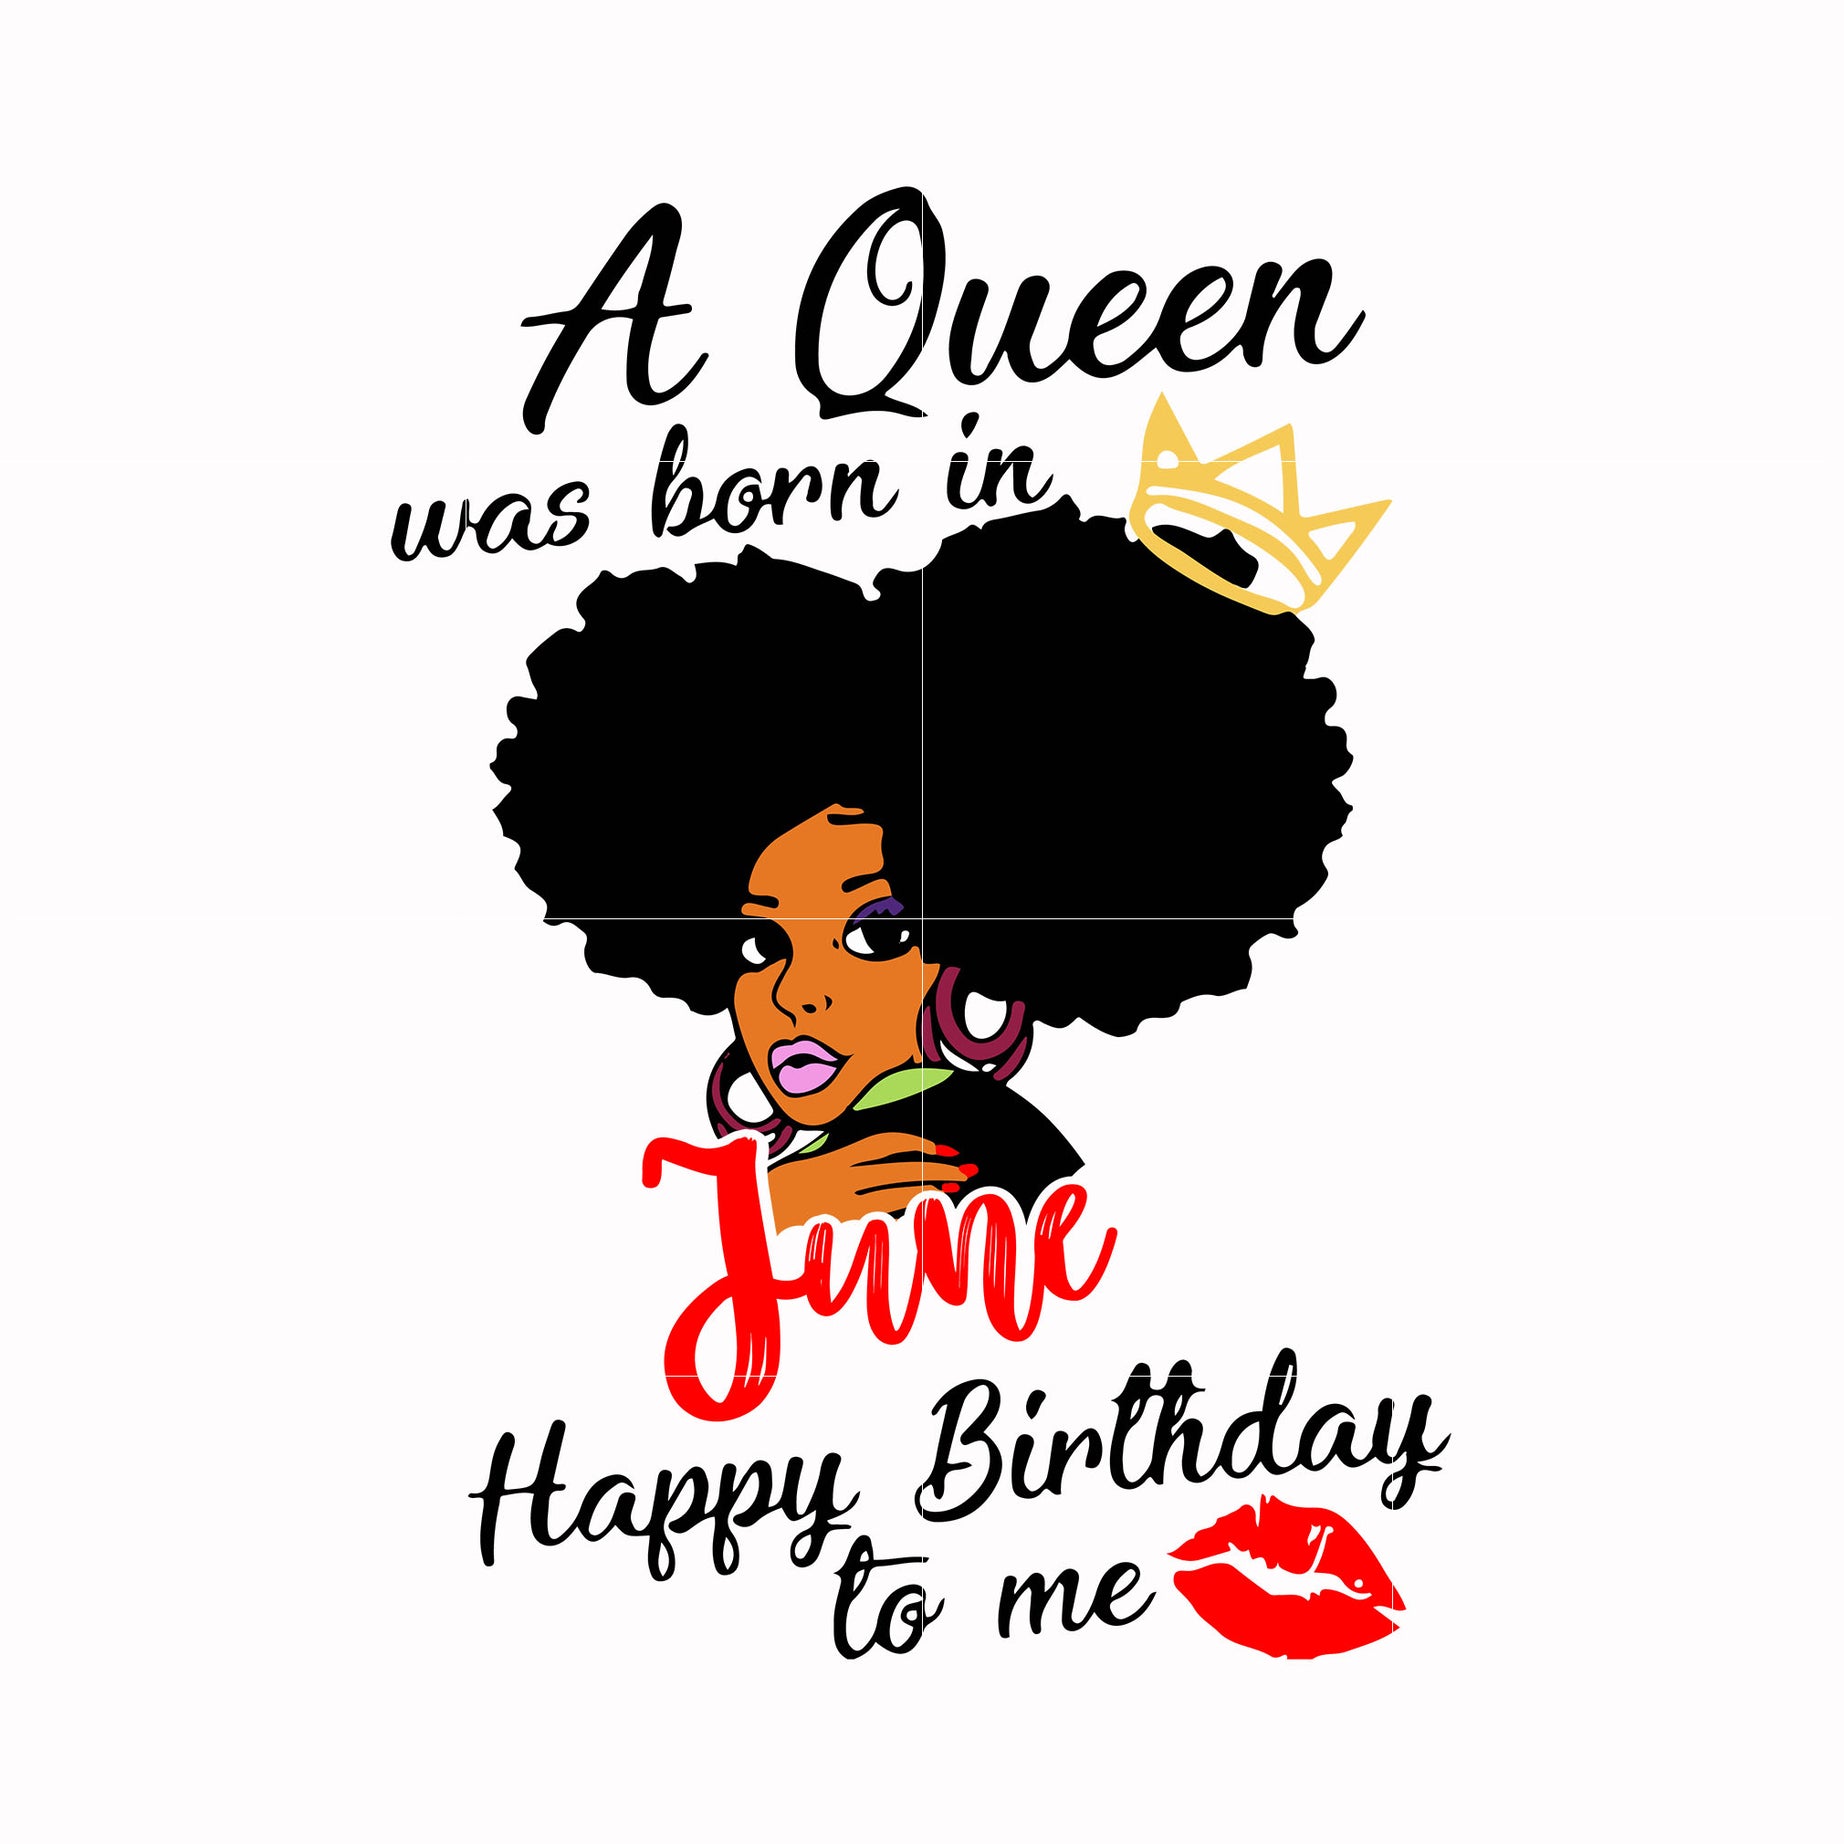 A queen was born in June happy birthday to me svg, png, dxf, eps digital file BD0054